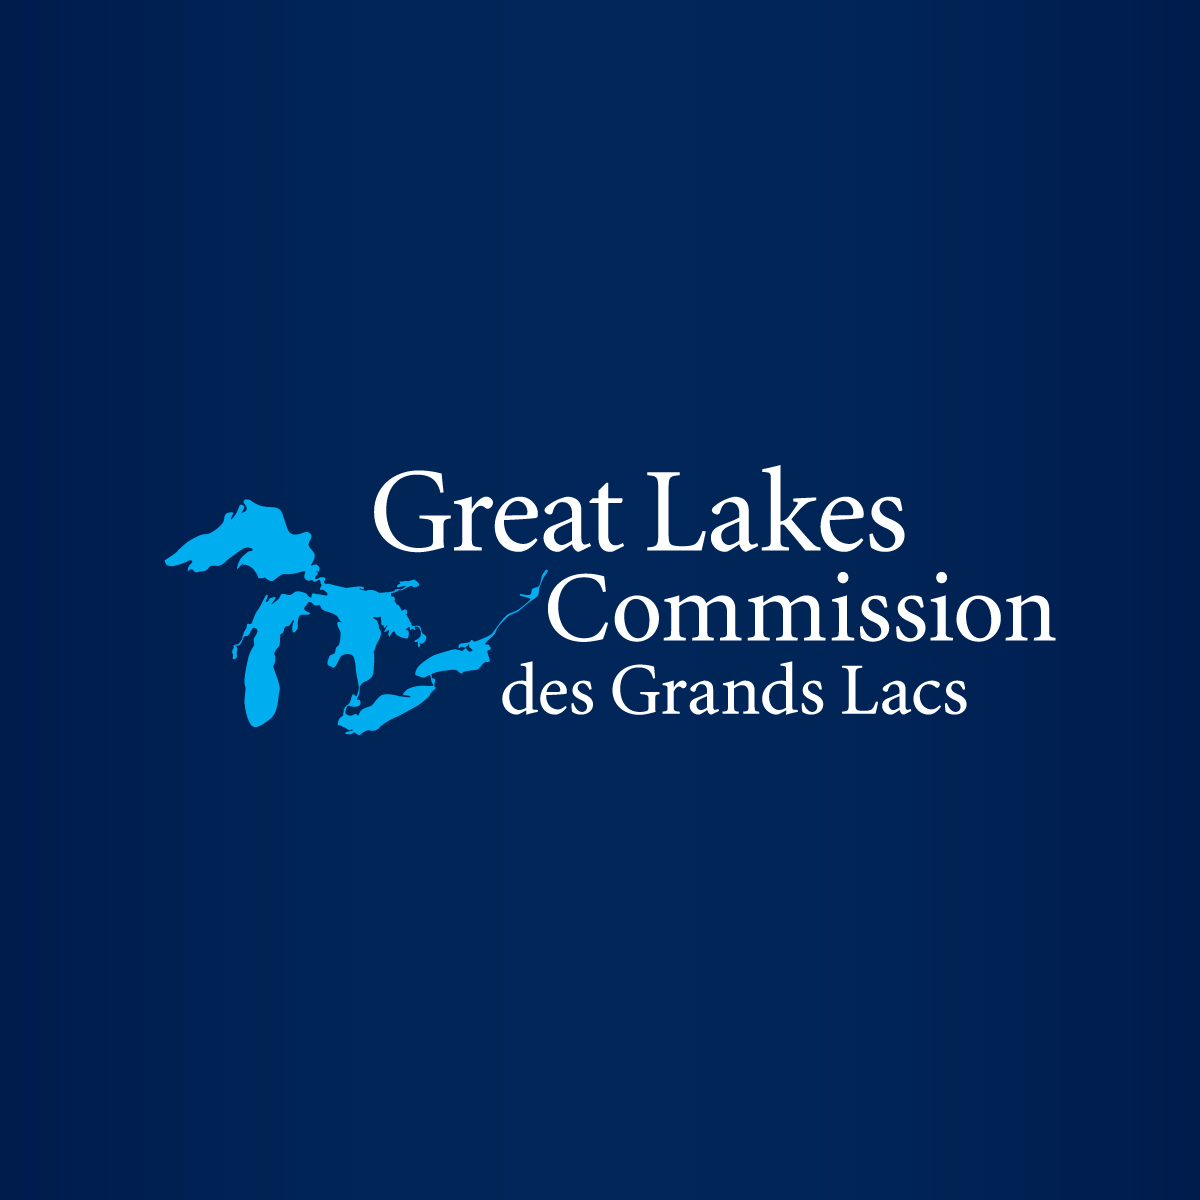 impact of limiting epas authority over power plant emissions on the great lakes